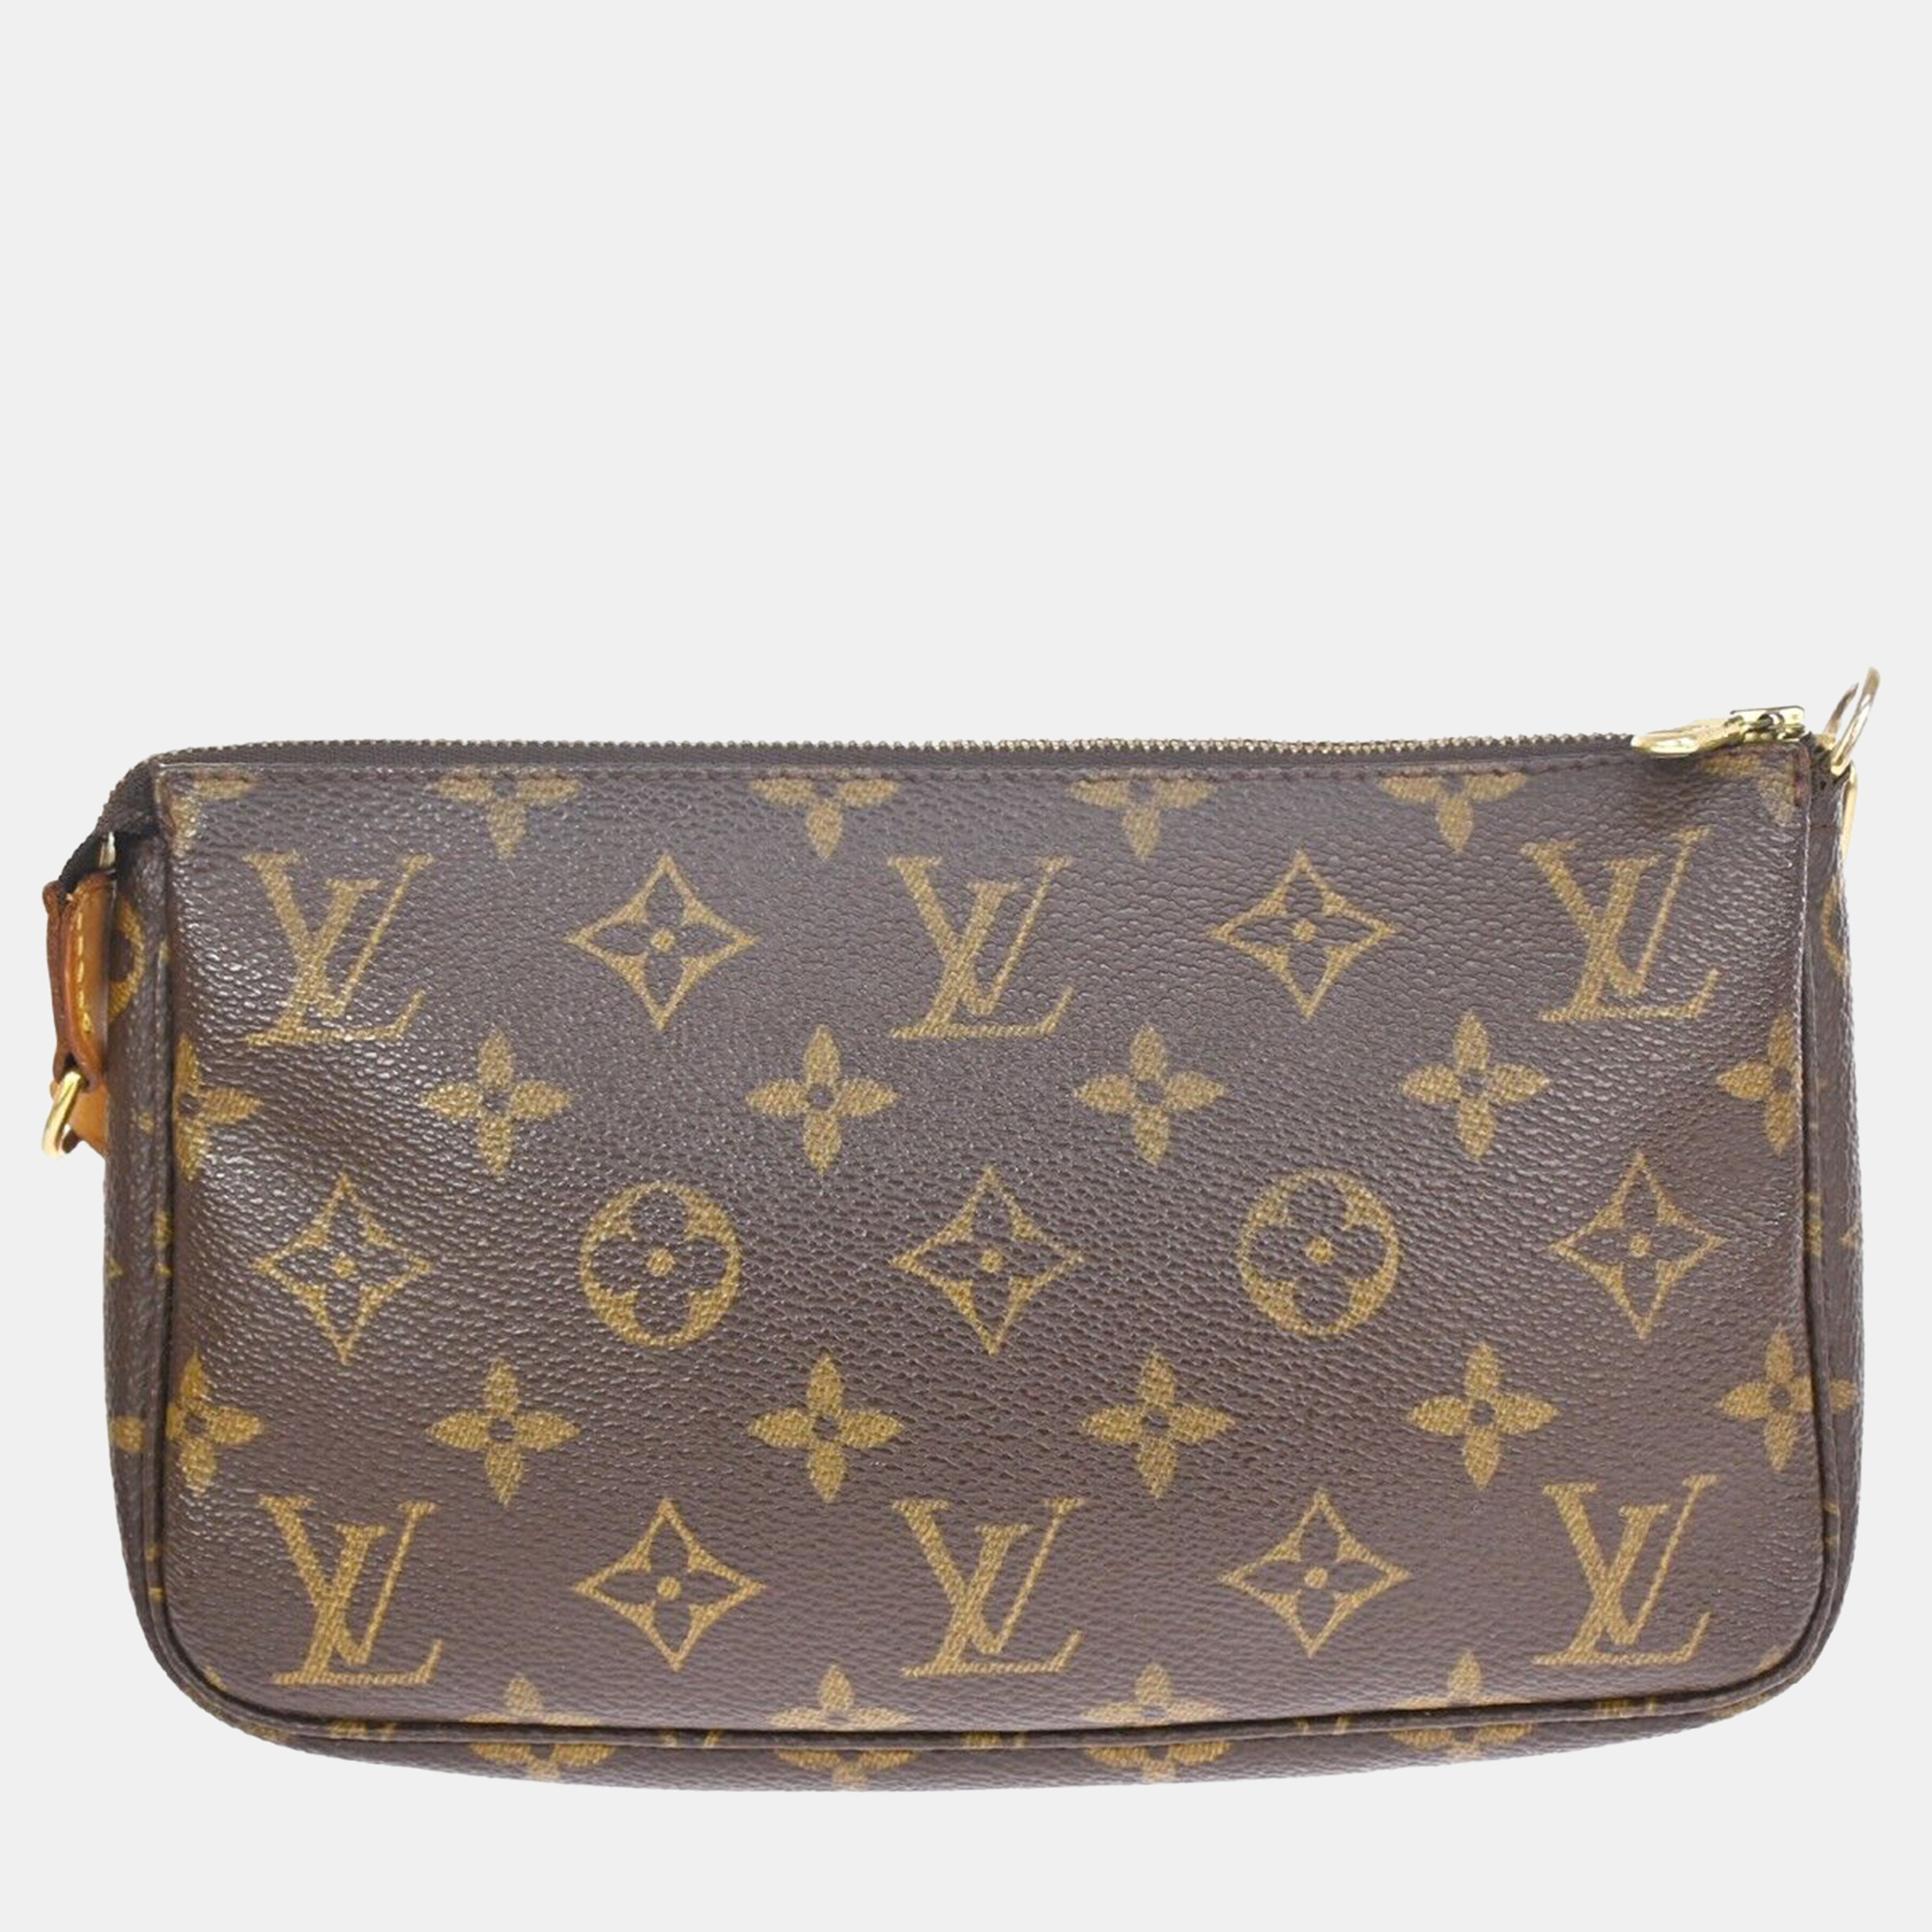 Crafted with exquisite precision this timeless Louis Vuitton clutch combines luxury with practicality ensuring you make a chic statement at every soirée.